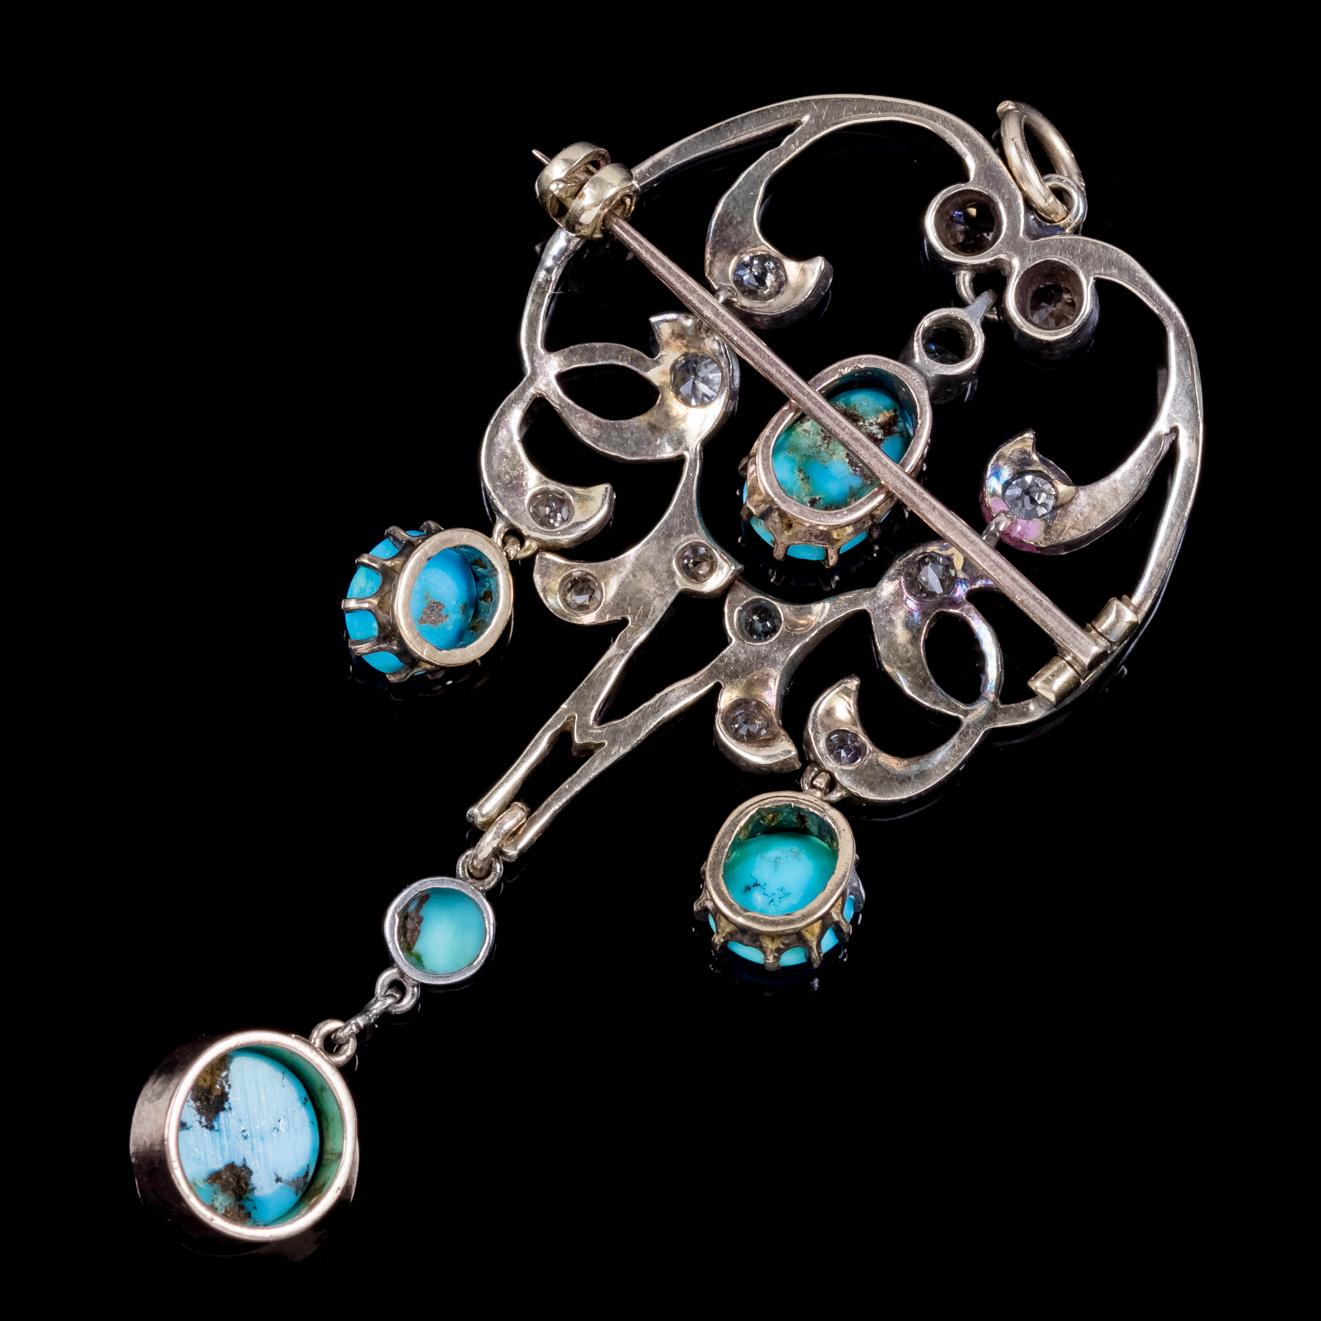 A beautiful antique Victorian pendant brooch Circa 1860, set with old cut Diamonds and five natural Turquoise droppers, the largest of which is 2ct and hangs from a swinging pendulum.  

Turquoise stones are considered a symbol of friendship and